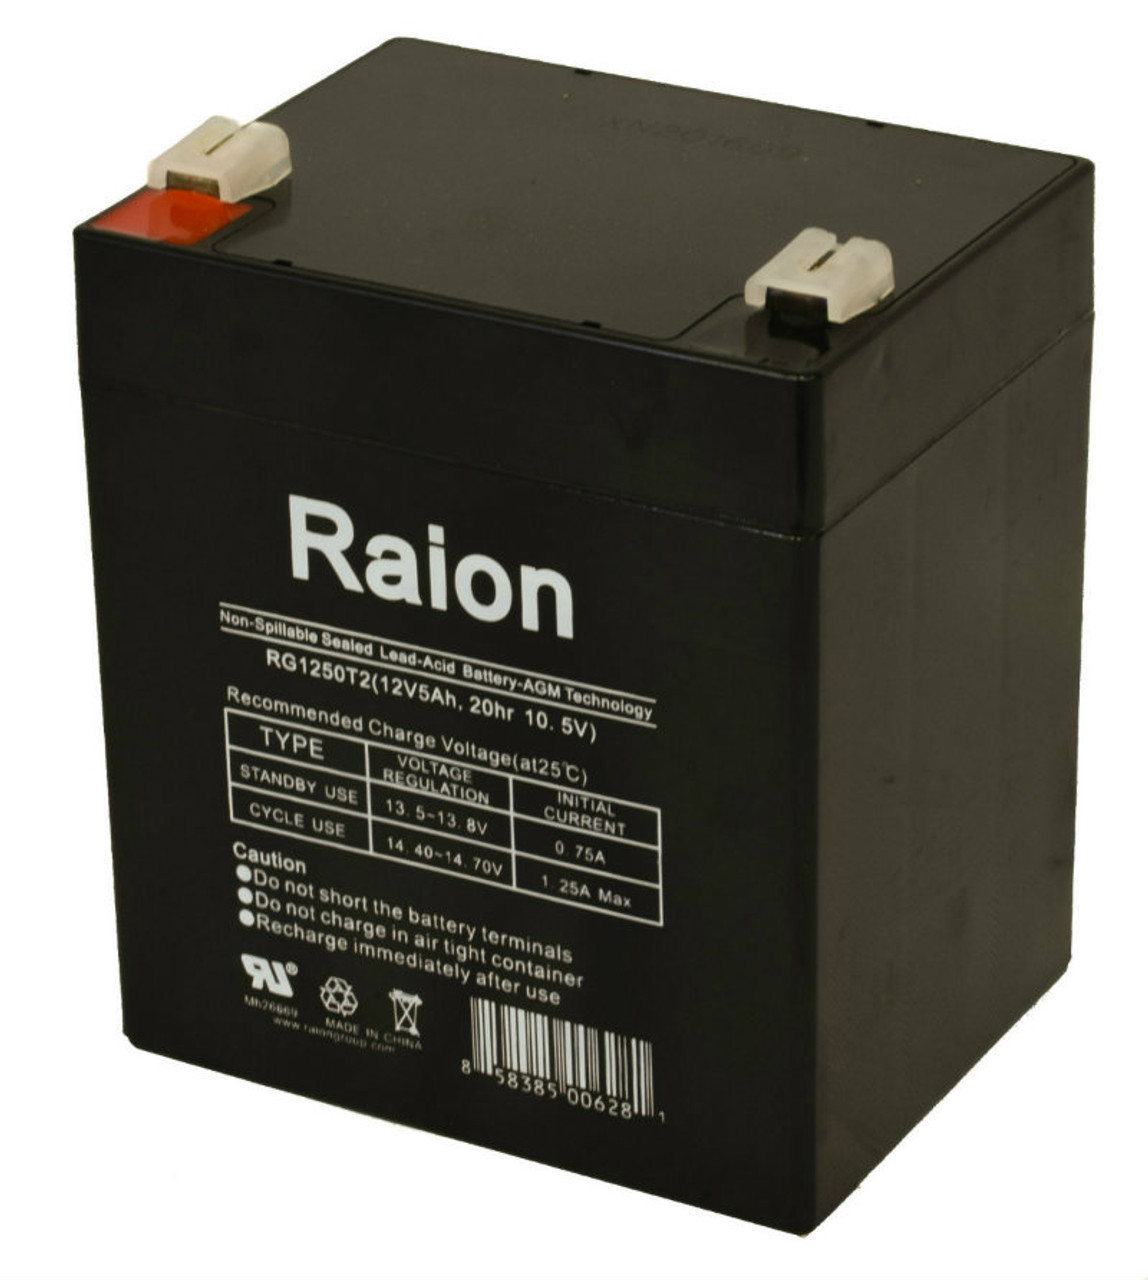 Raion Power RG1250T1 Replacement Fire Alarm Control Panel Battery for Ansul Alarms